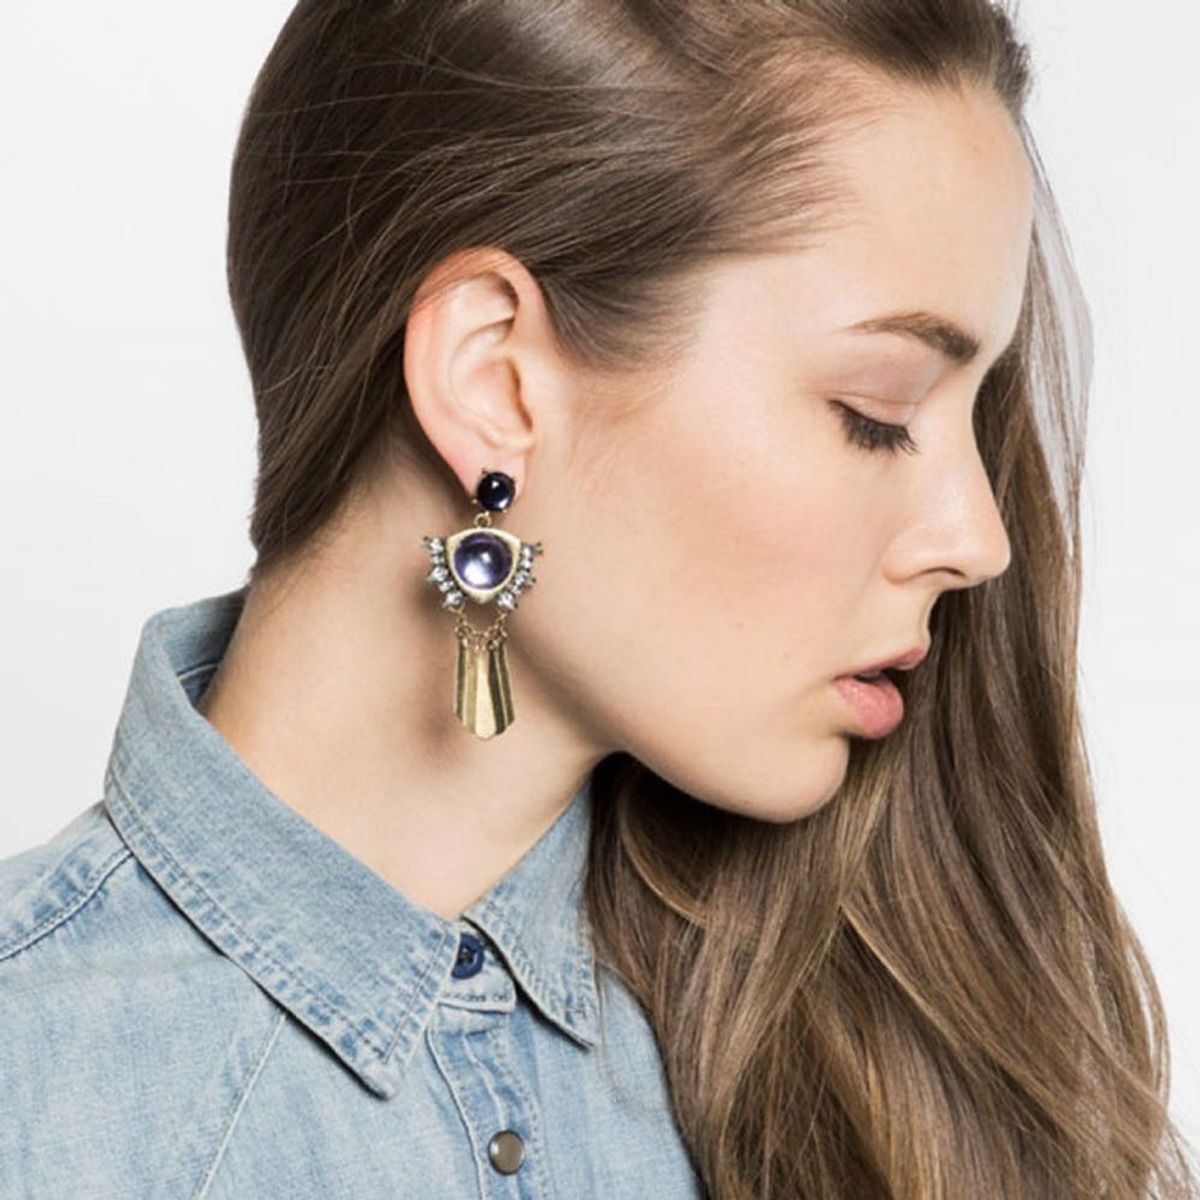 5 Jewelry Trends That Will Be Huge This Spring